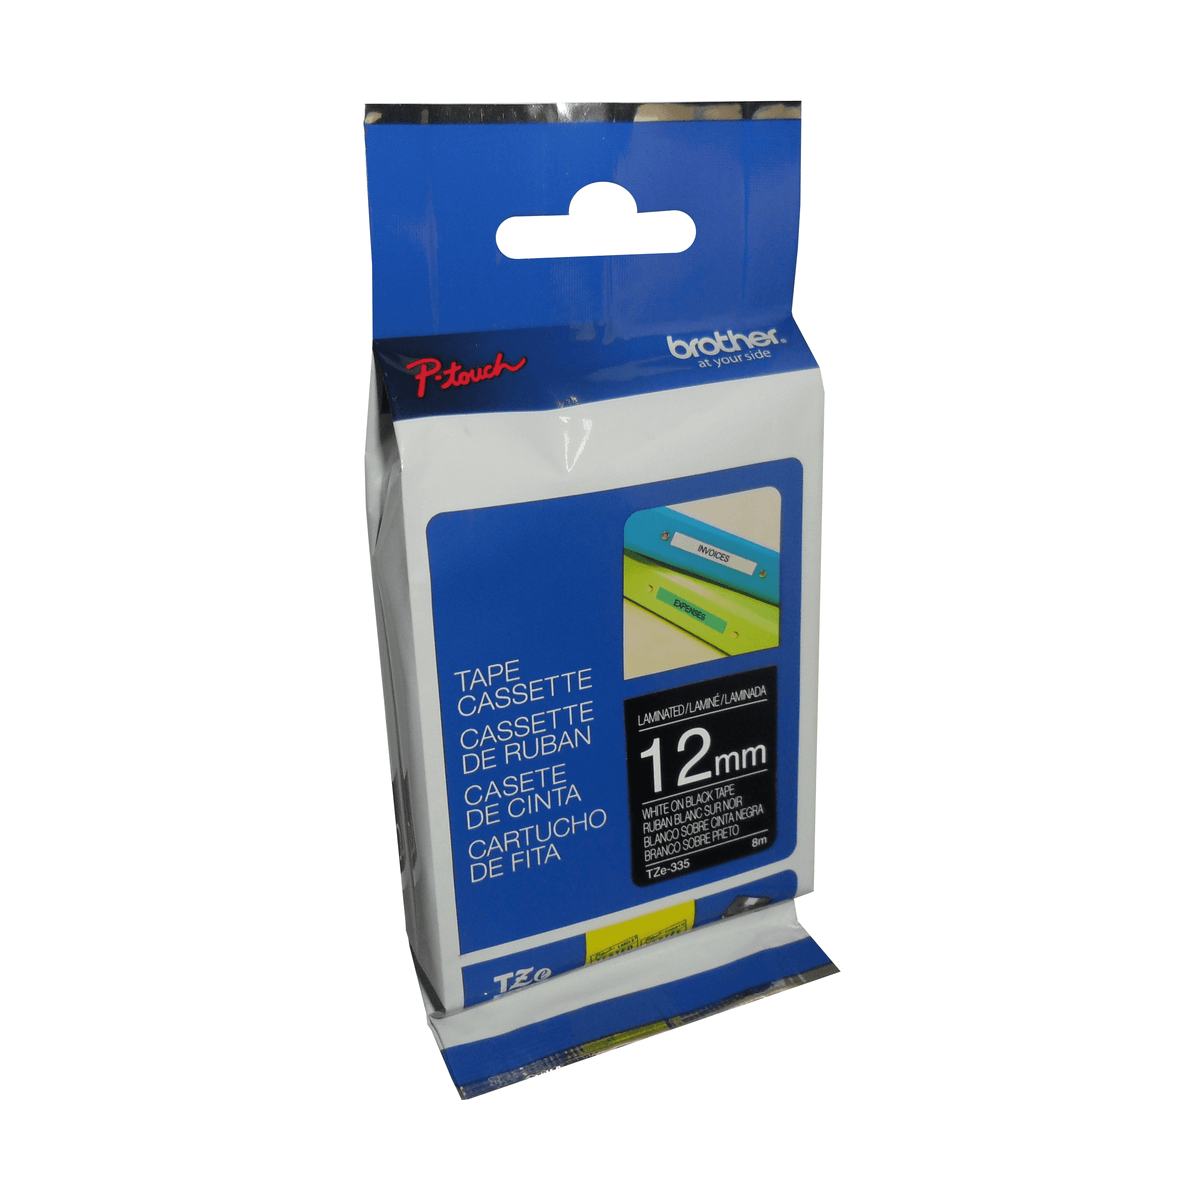 Brother Genuine TZe335 White on Black Laminated Tape for P-touch Label Makers, 12 mm wide x 8 m long